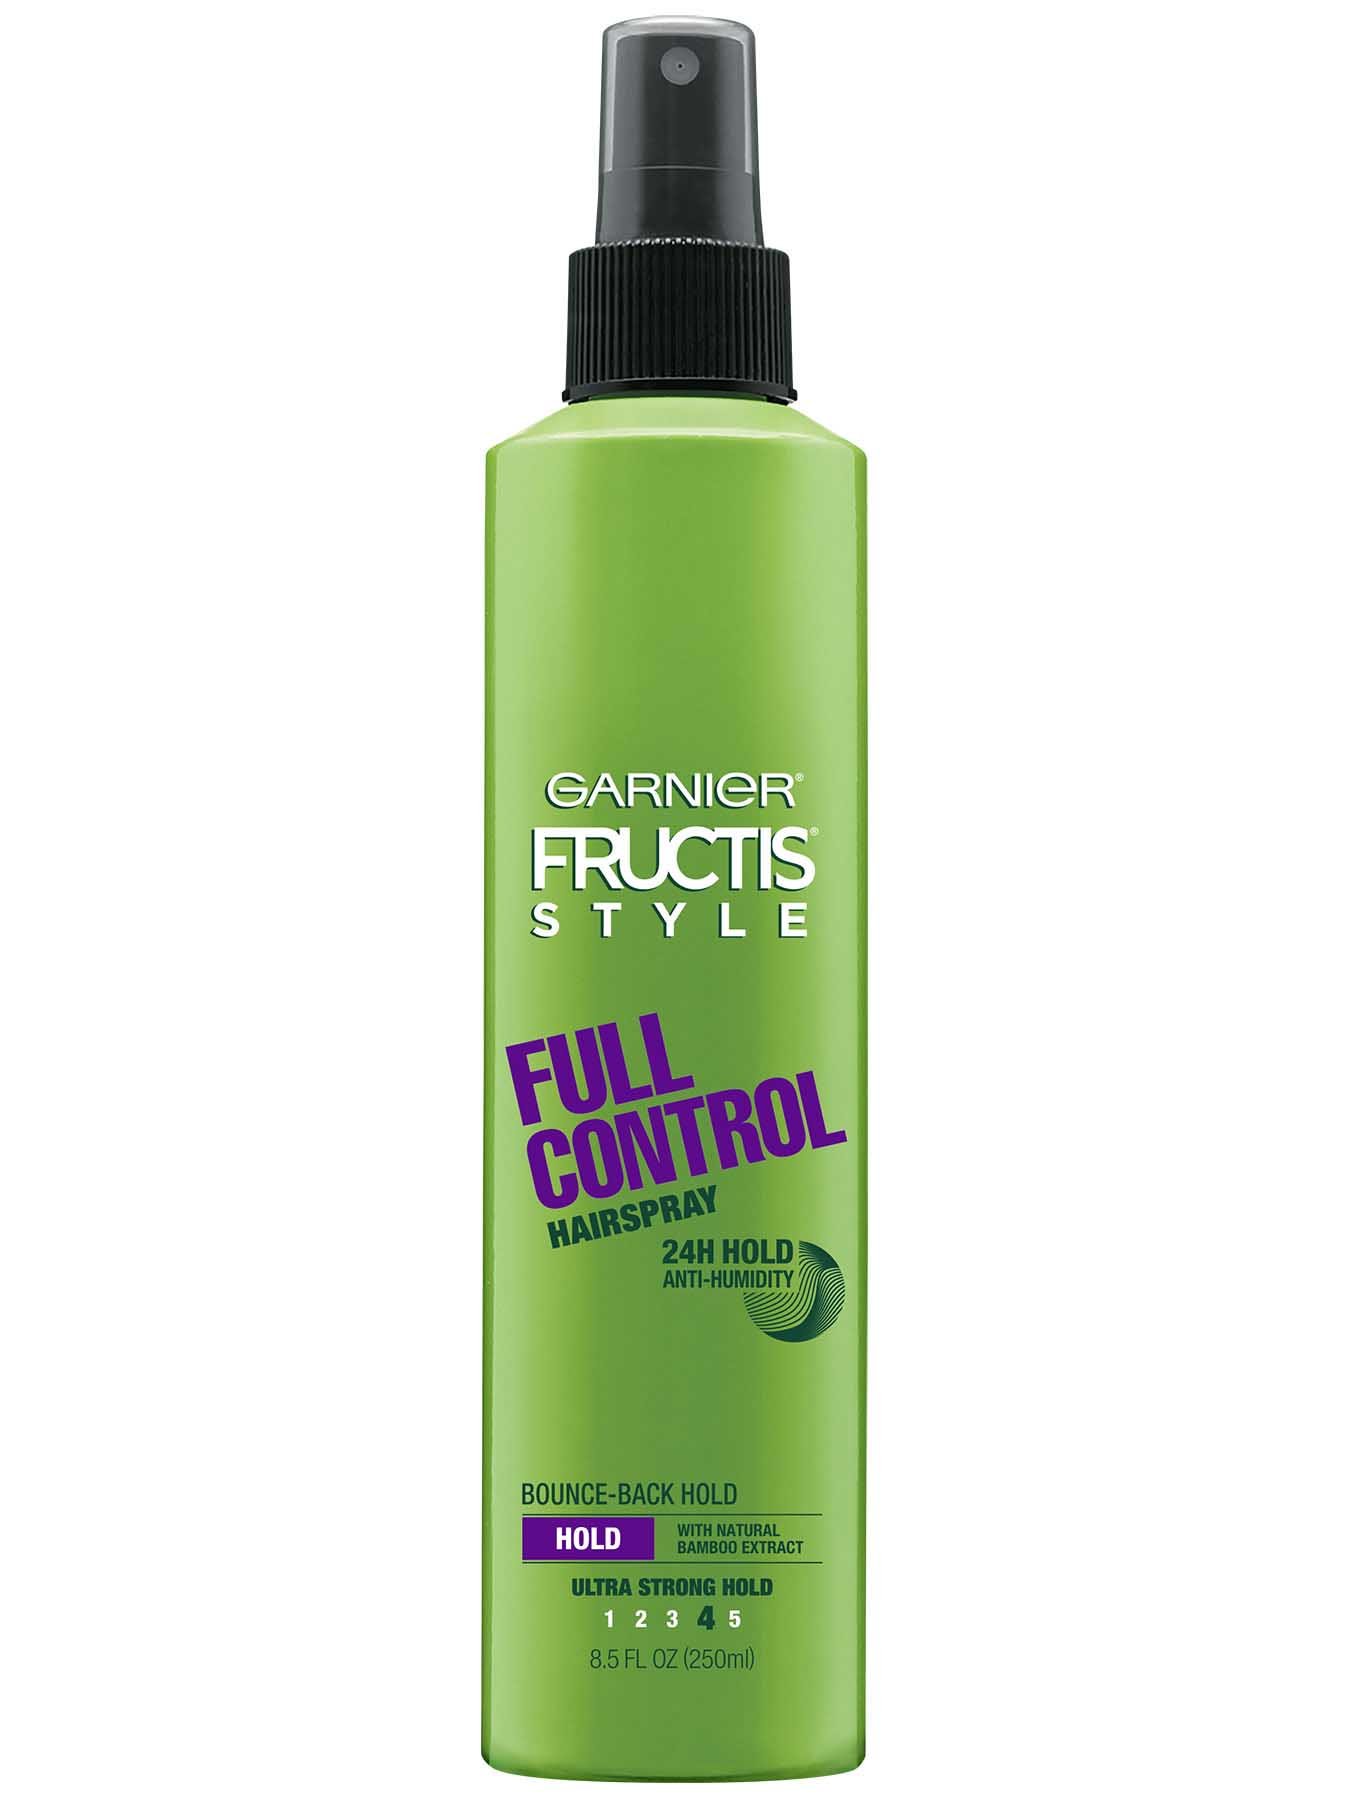 Front view of Full Control Anti-Humidity Non Aerosol Hairspray.